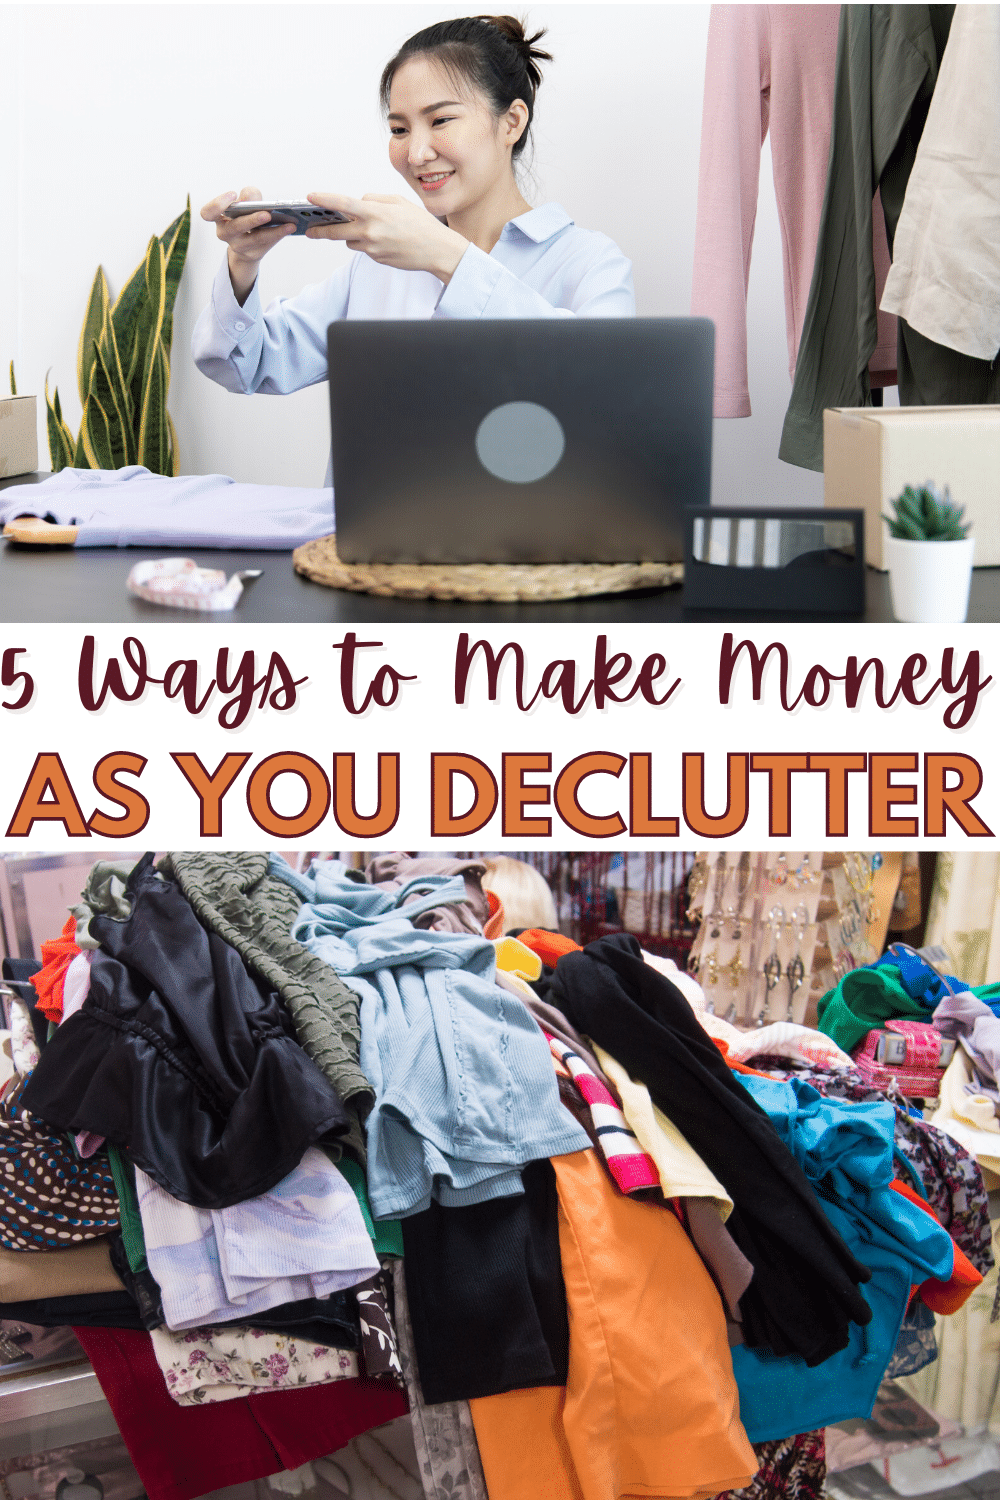 Short on cash? Overwhelmed with too much stuff? Check out these simple ways to make extra money as you unclutter your home. #makingmoney #decluttering via @wondermomwannab